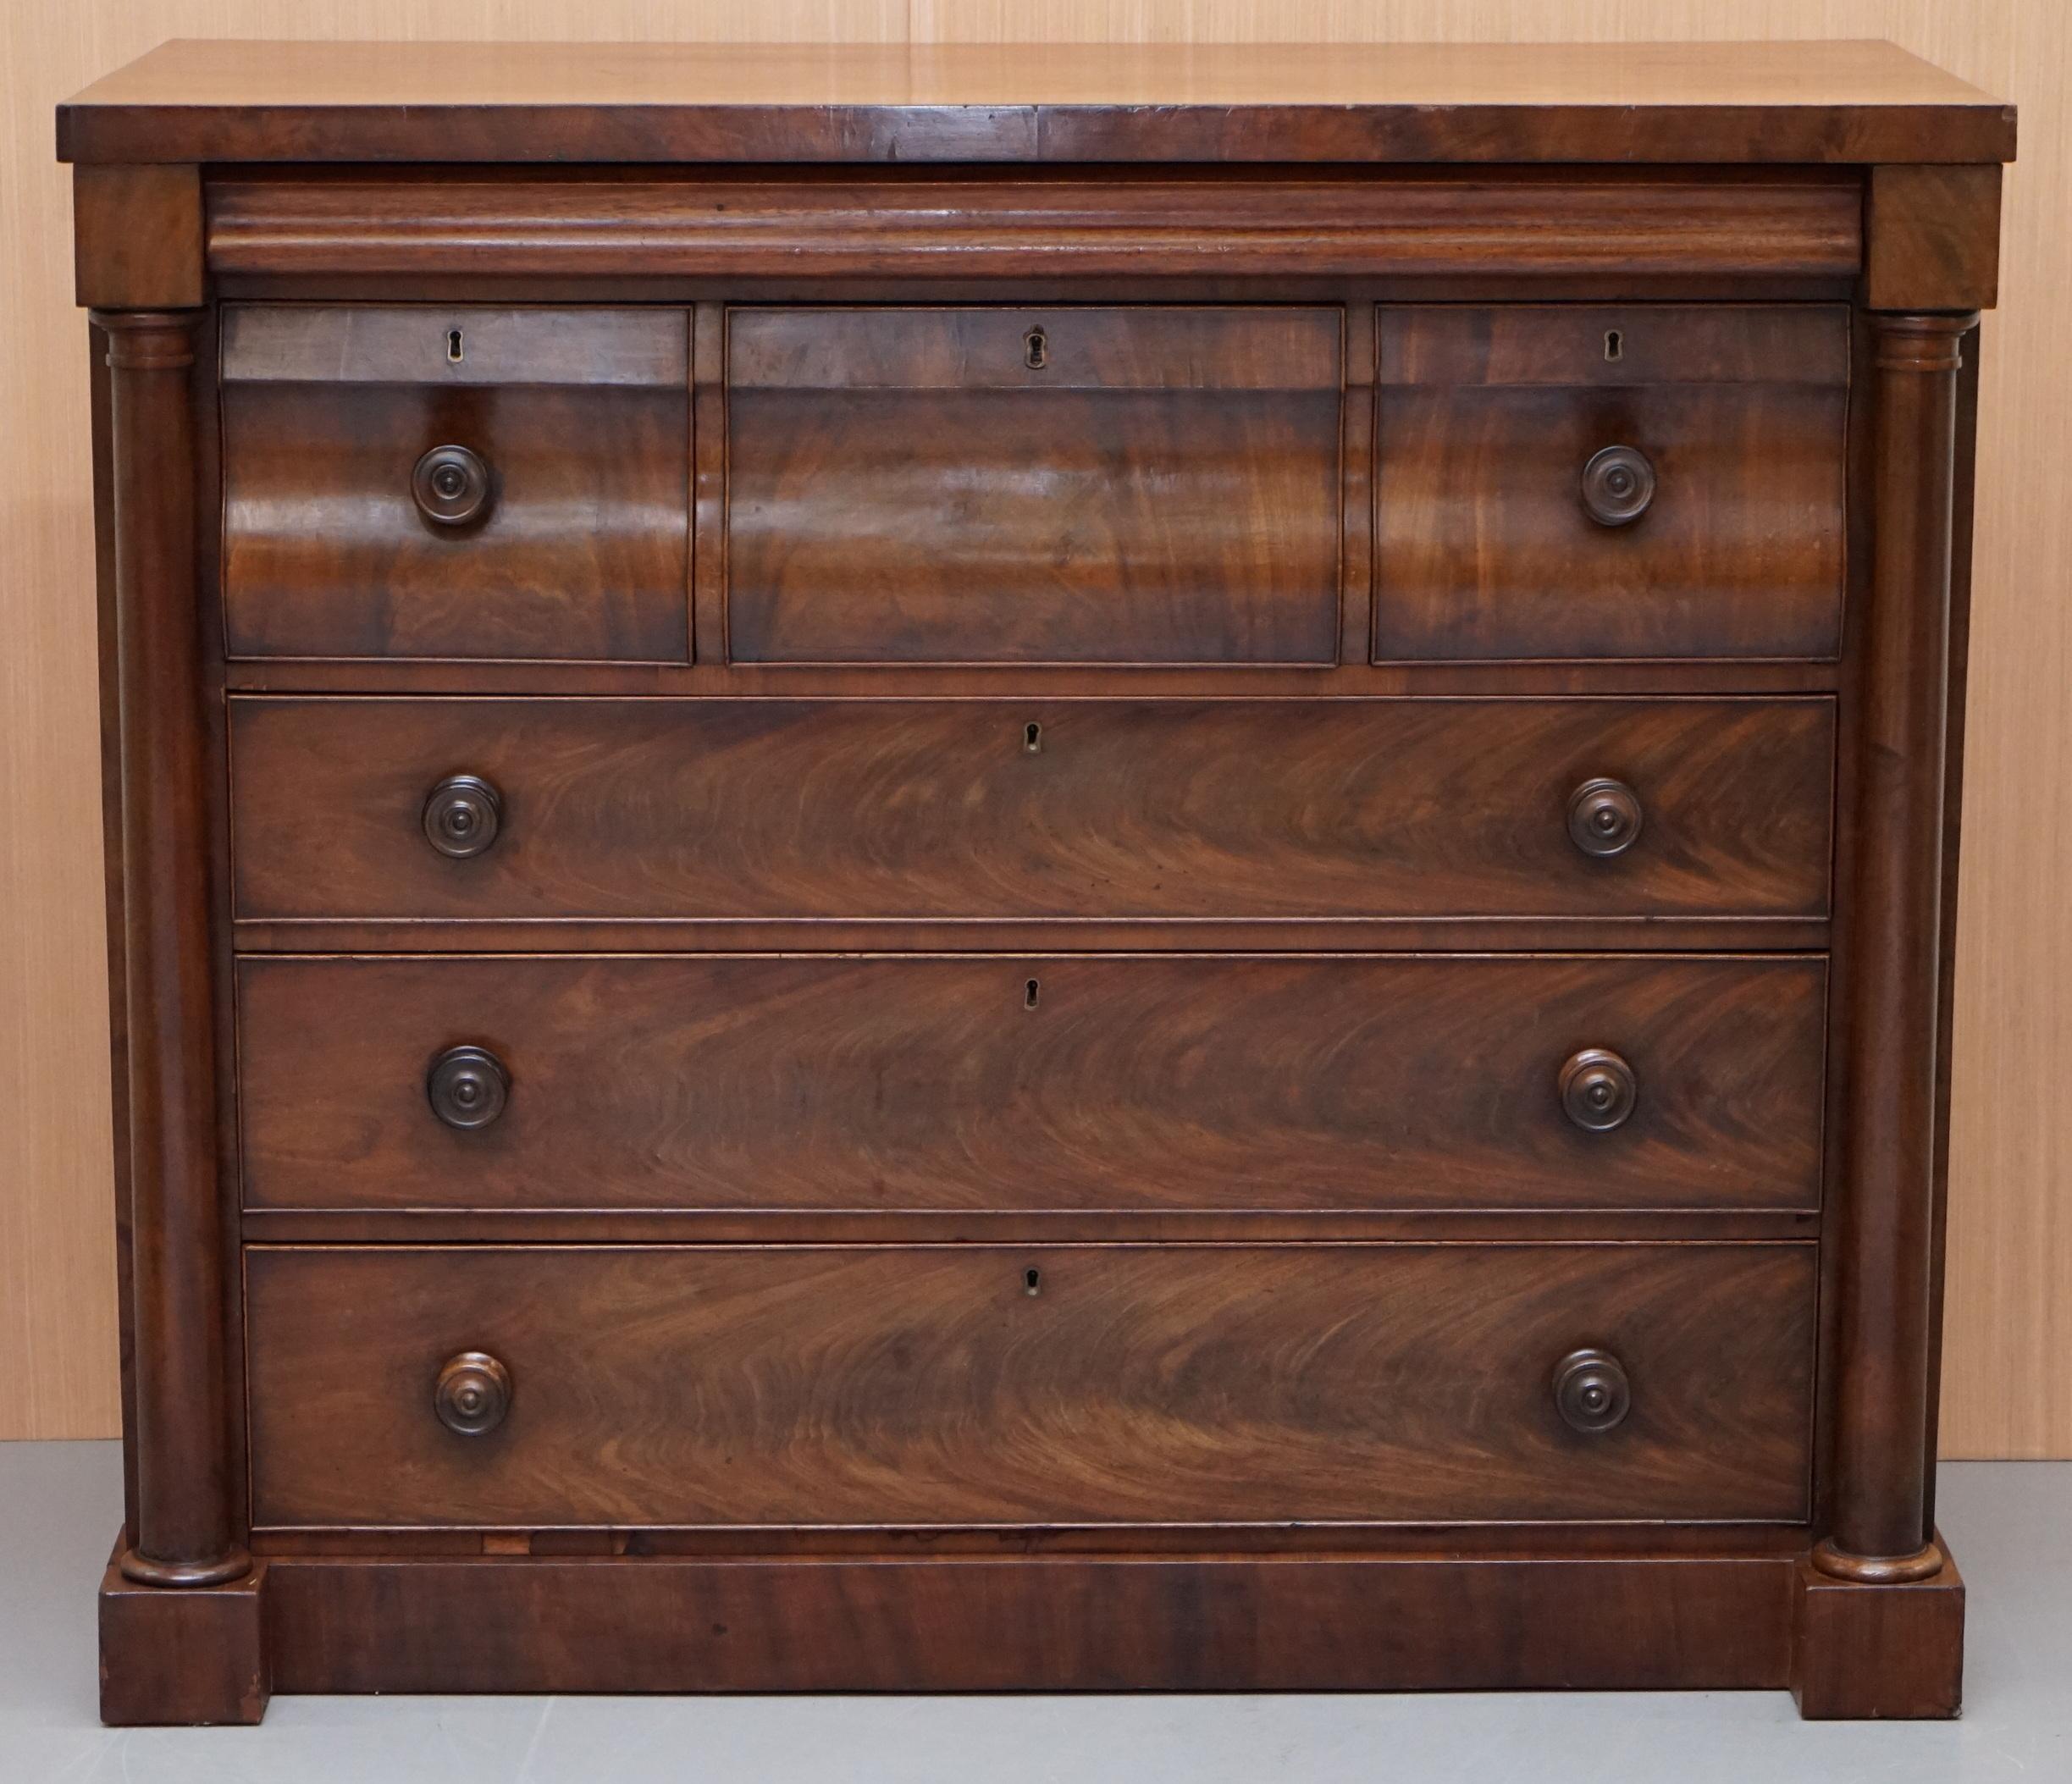 We are delighted to offer for sale this stunning large 19th century flamed mahogany chest of drawers 

A very good looking and functional piece of collectable furniture. These drawers are around 20% larger than standard pieces, they really command